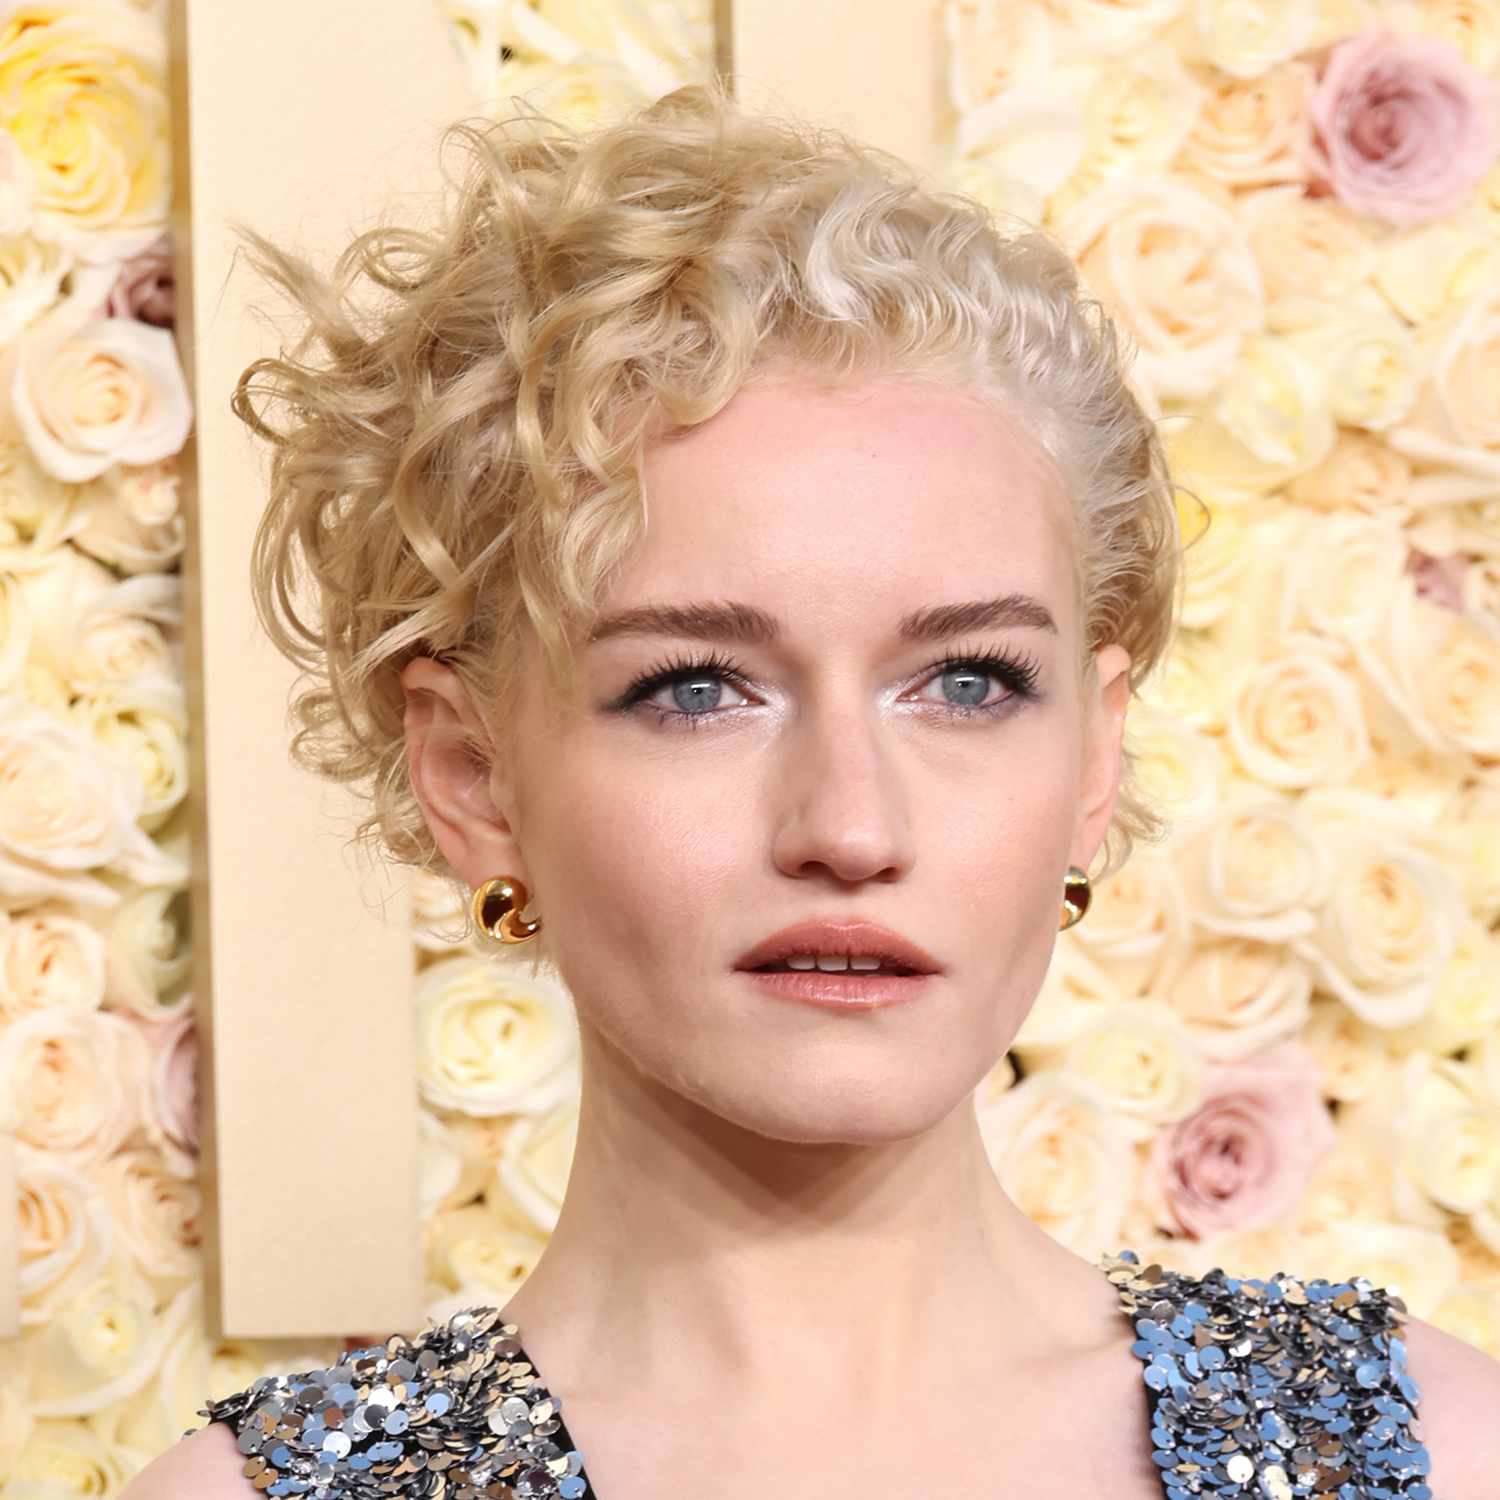 Julia Garner attends the Golden Globes with a curly pixie in an over directed style